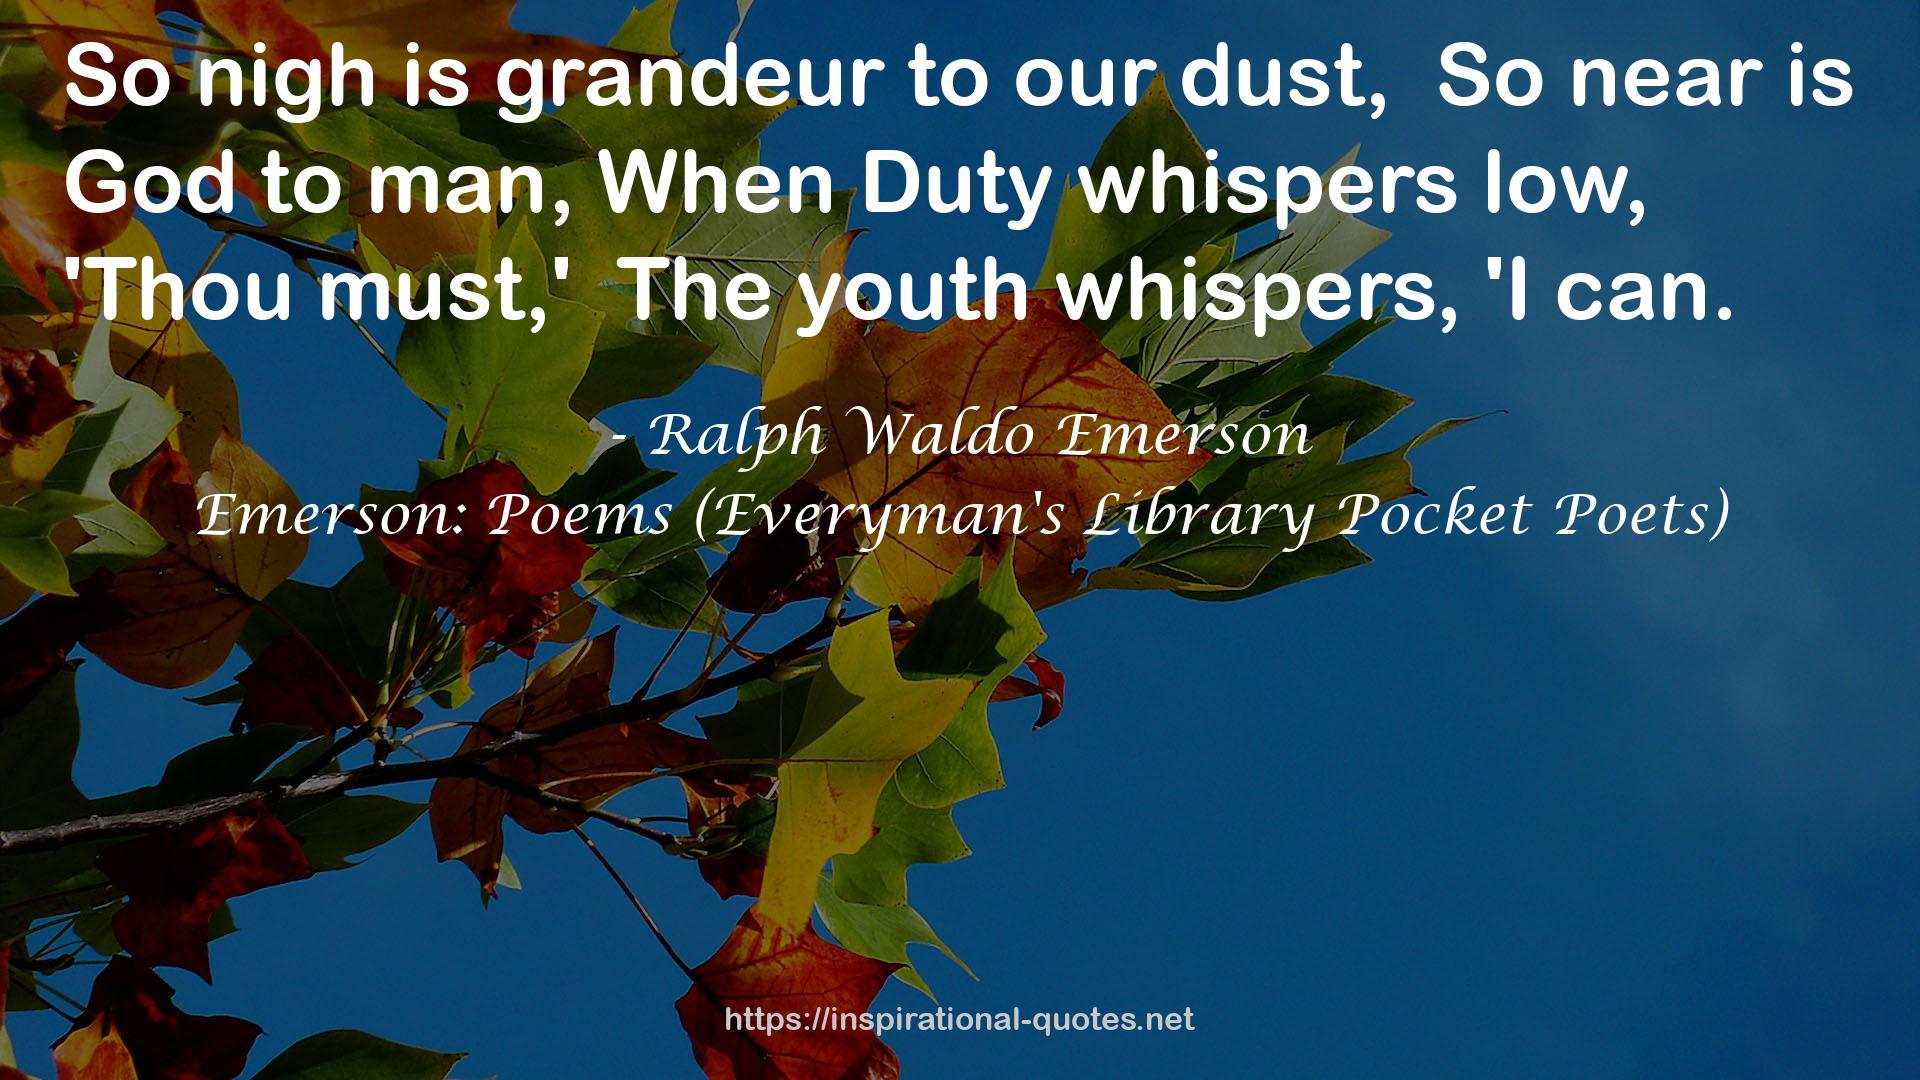 Emerson: Poems (Everyman's Library Pocket Poets) QUOTES